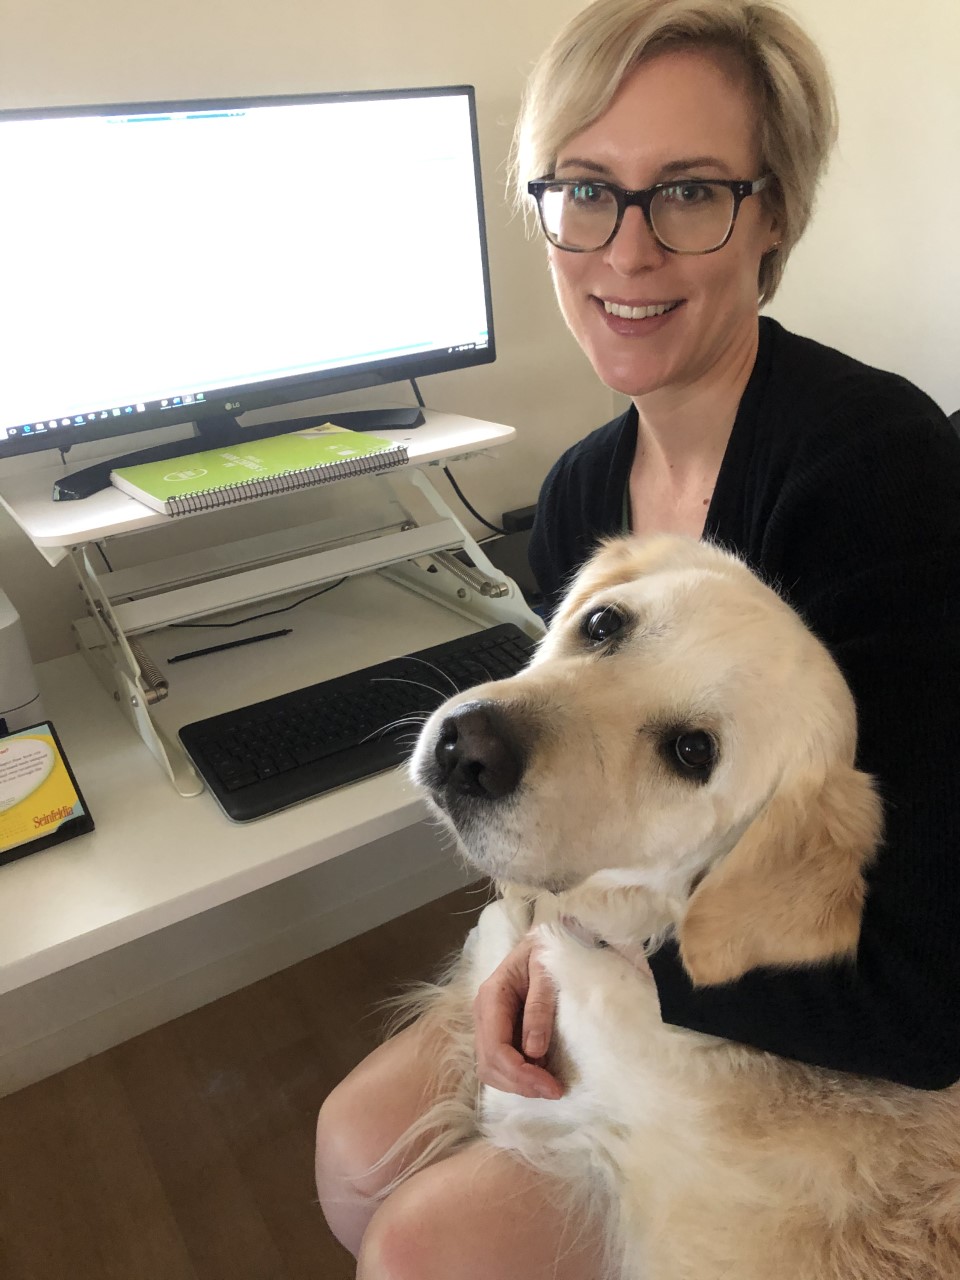 Library technician Kristina Read and her dog Moose, working from home - sitting at a computer together